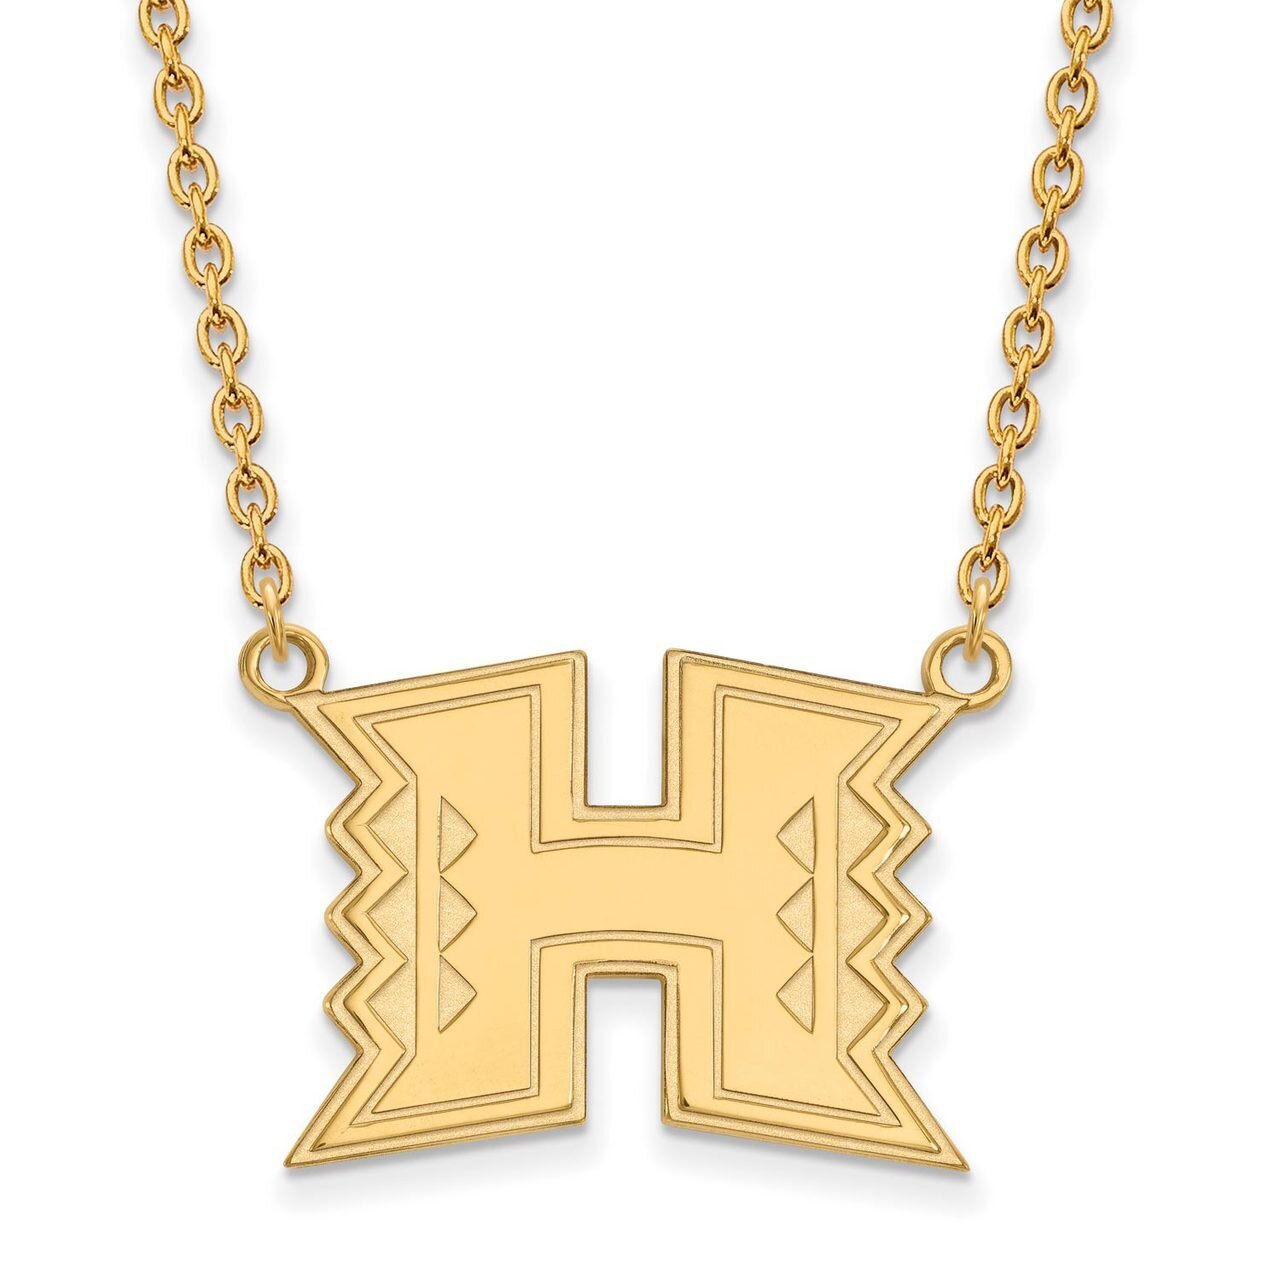 The University of Hawaii Large Pendant with Chain Necklace Gold-plated Silver GP010UHI-18